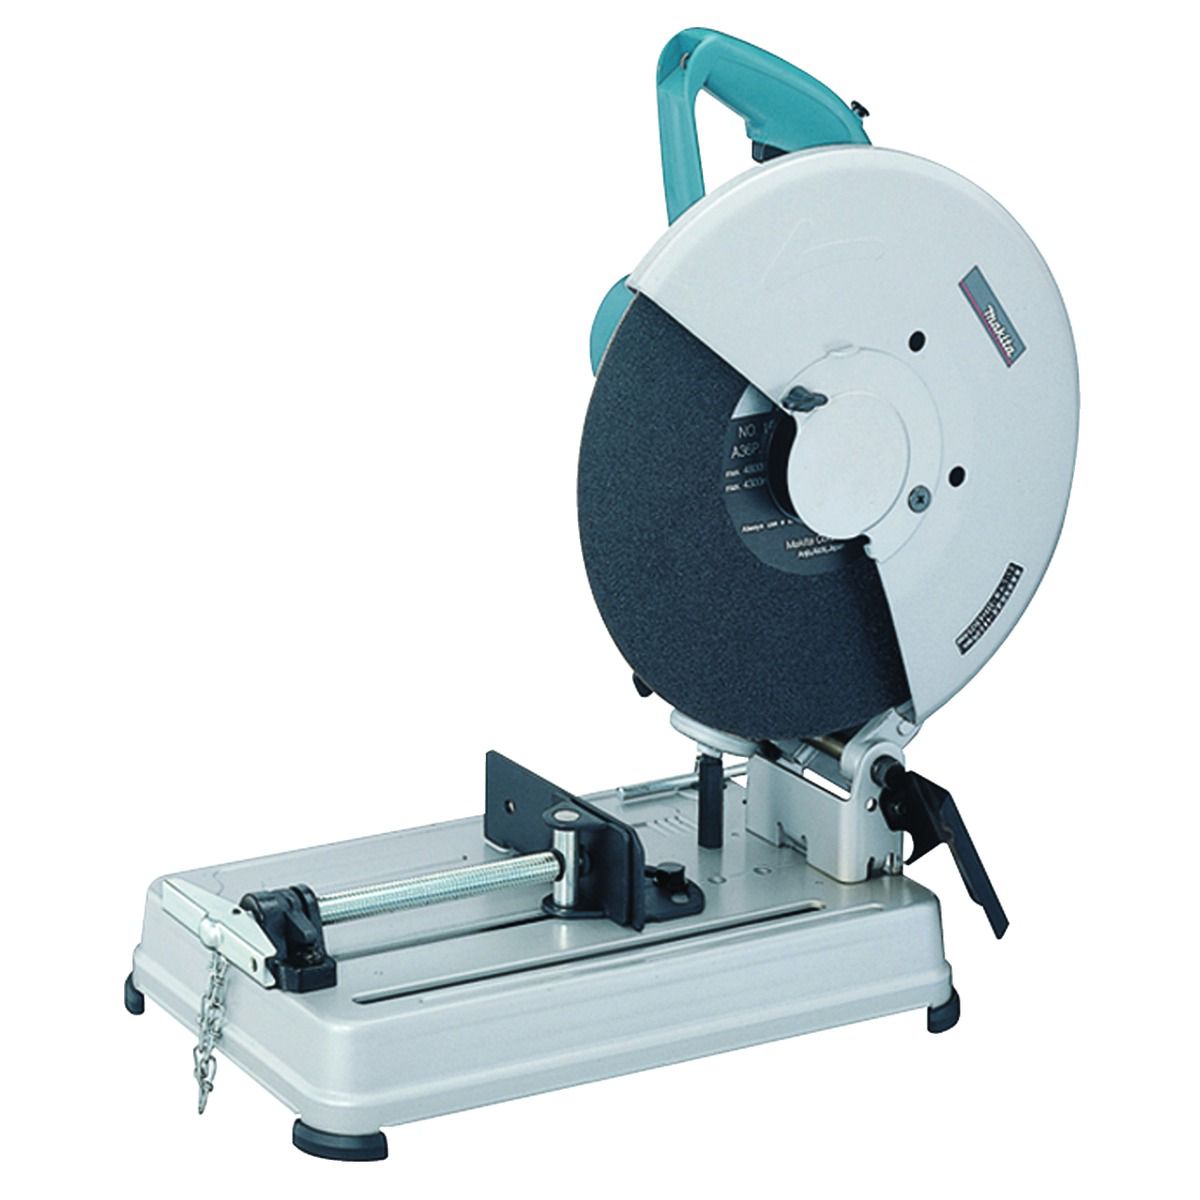 Image of Makita LW1401S/2 355mm Abrasive Cut-Off Saw 240V - Corded 2000W